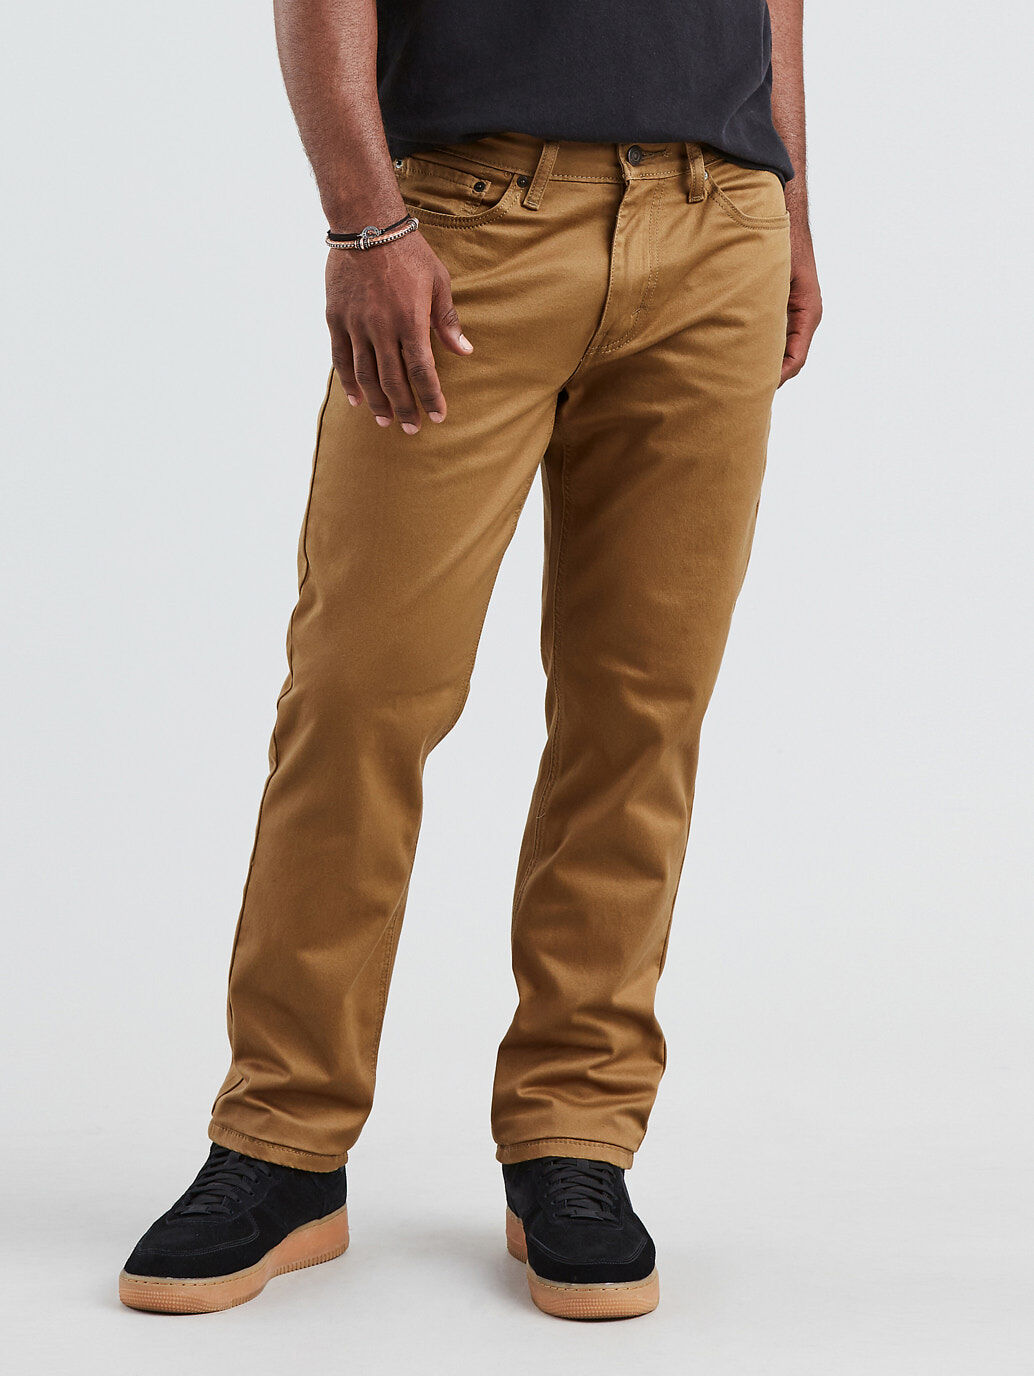 levi's 541 athletic fit stretch chinos